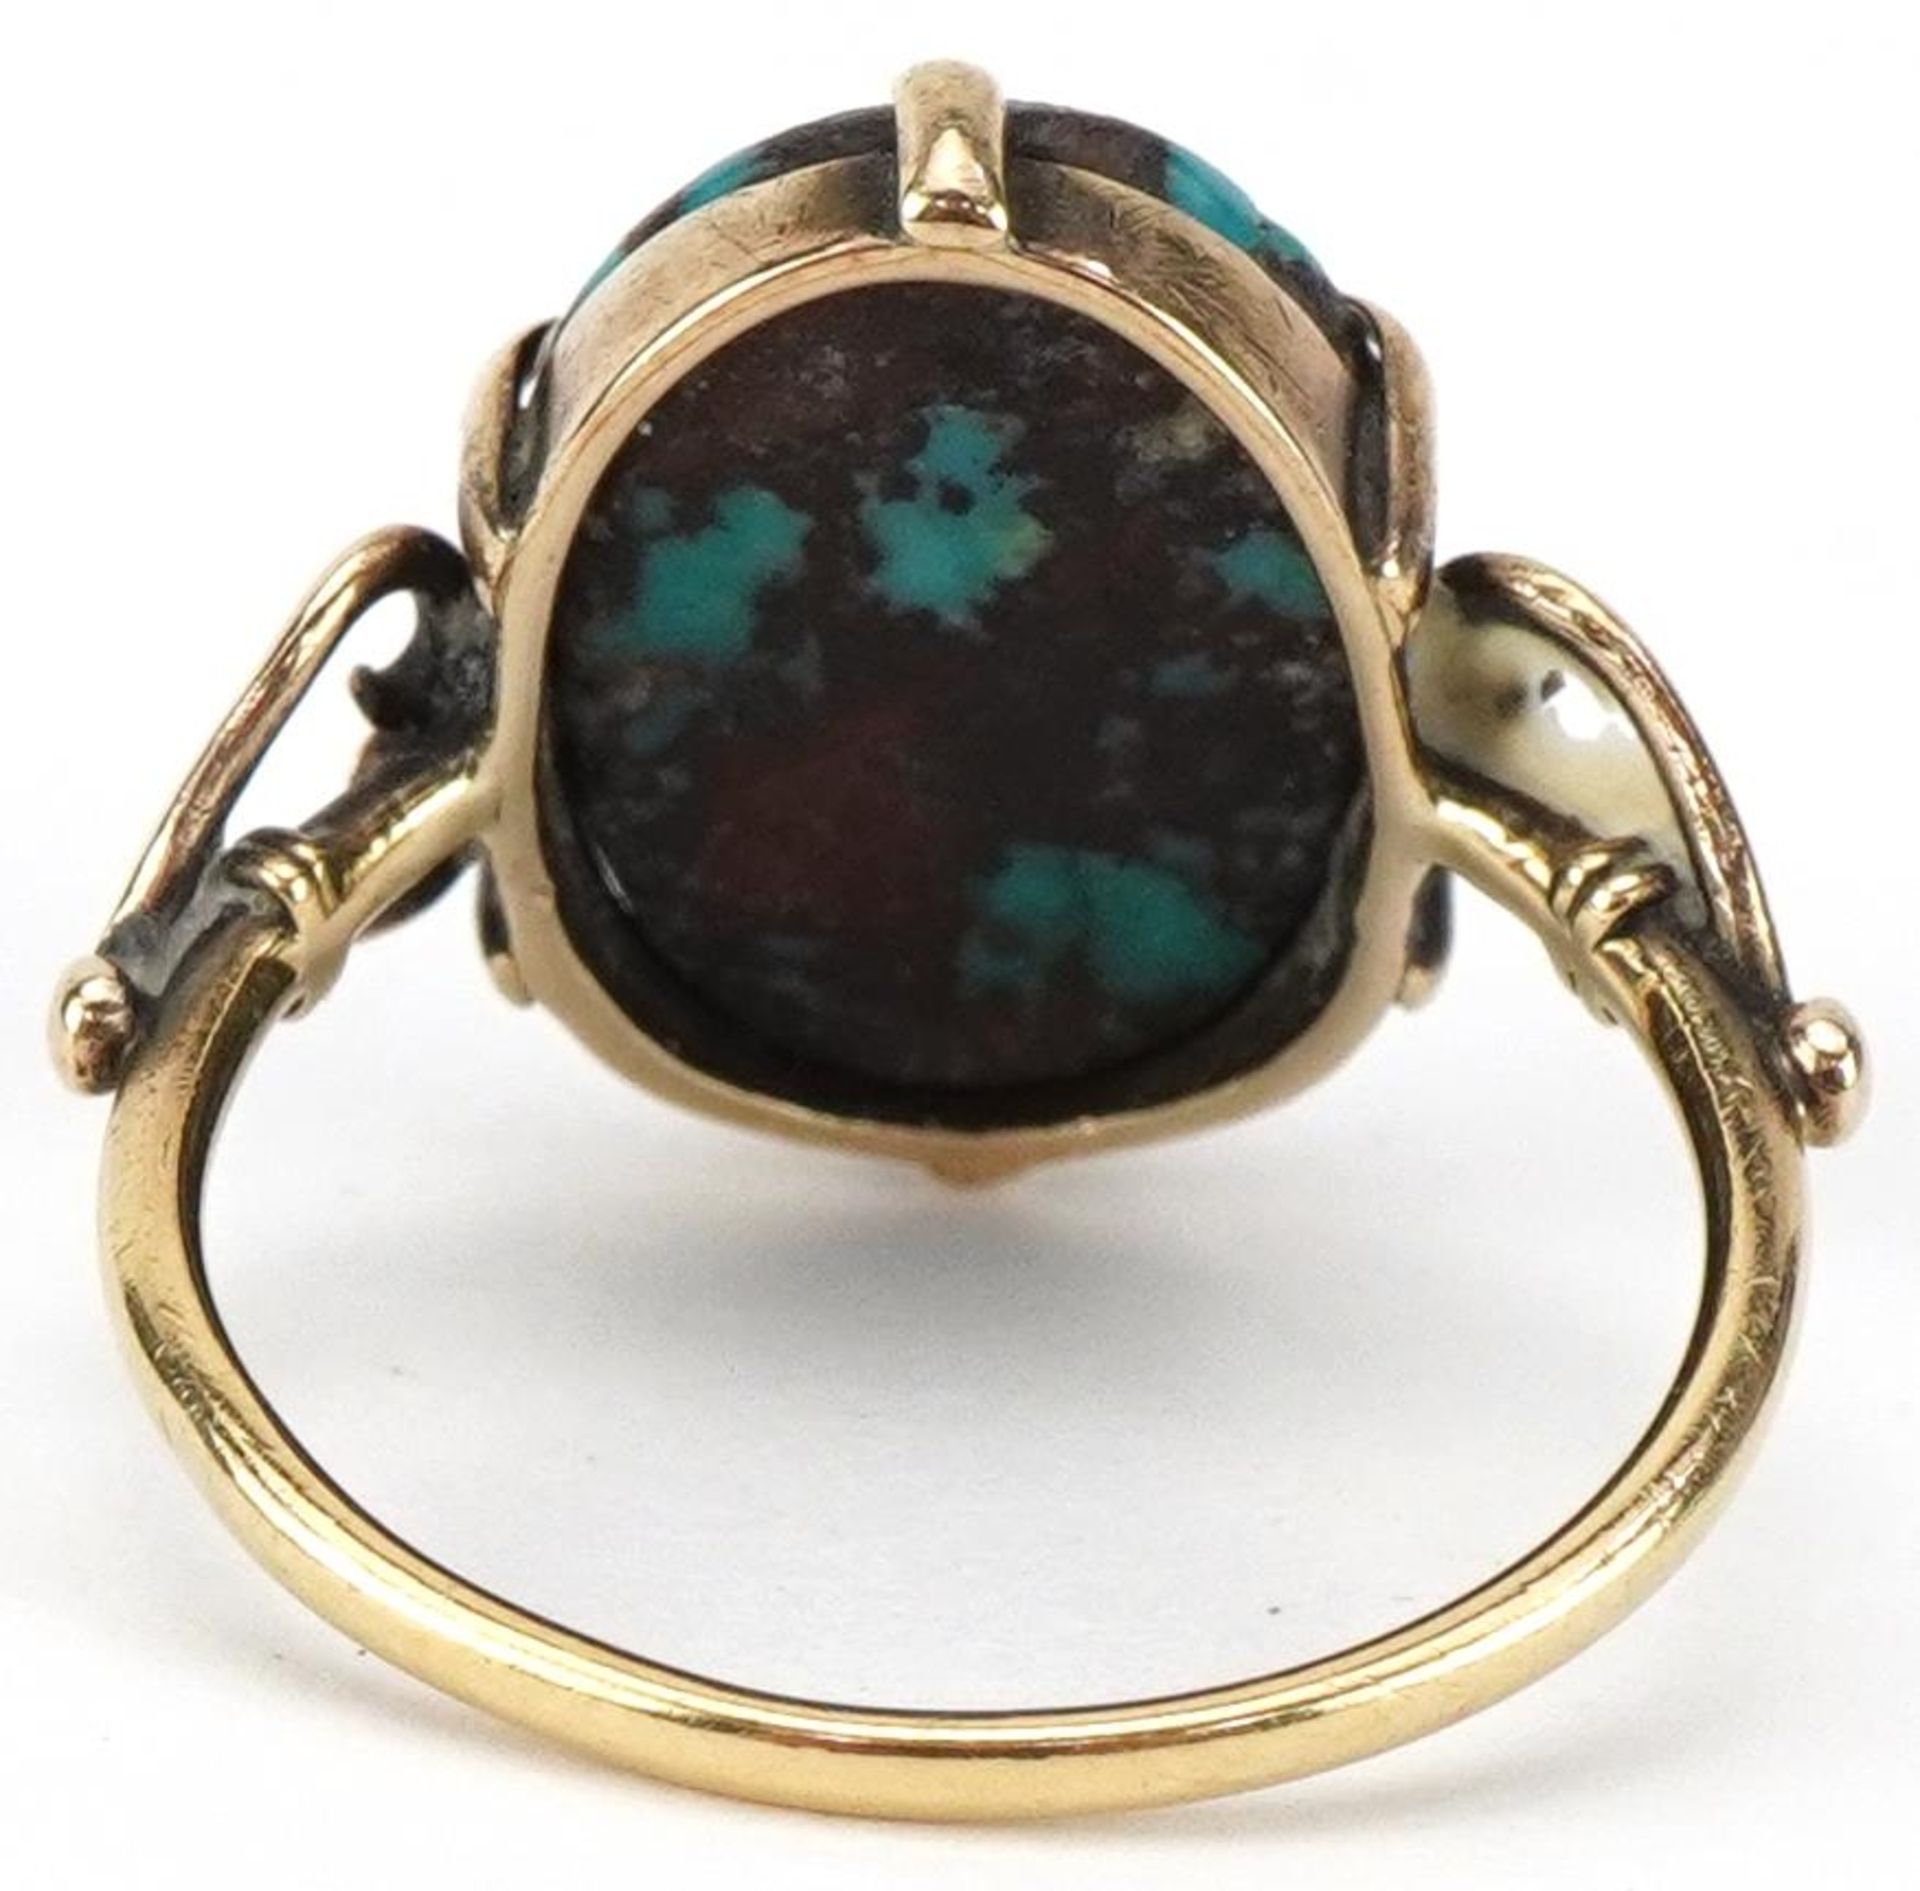 Antique unmarked gold cabochon matrix turquoise ring with love heart shoulders, tests as 15ct - Image 2 of 3